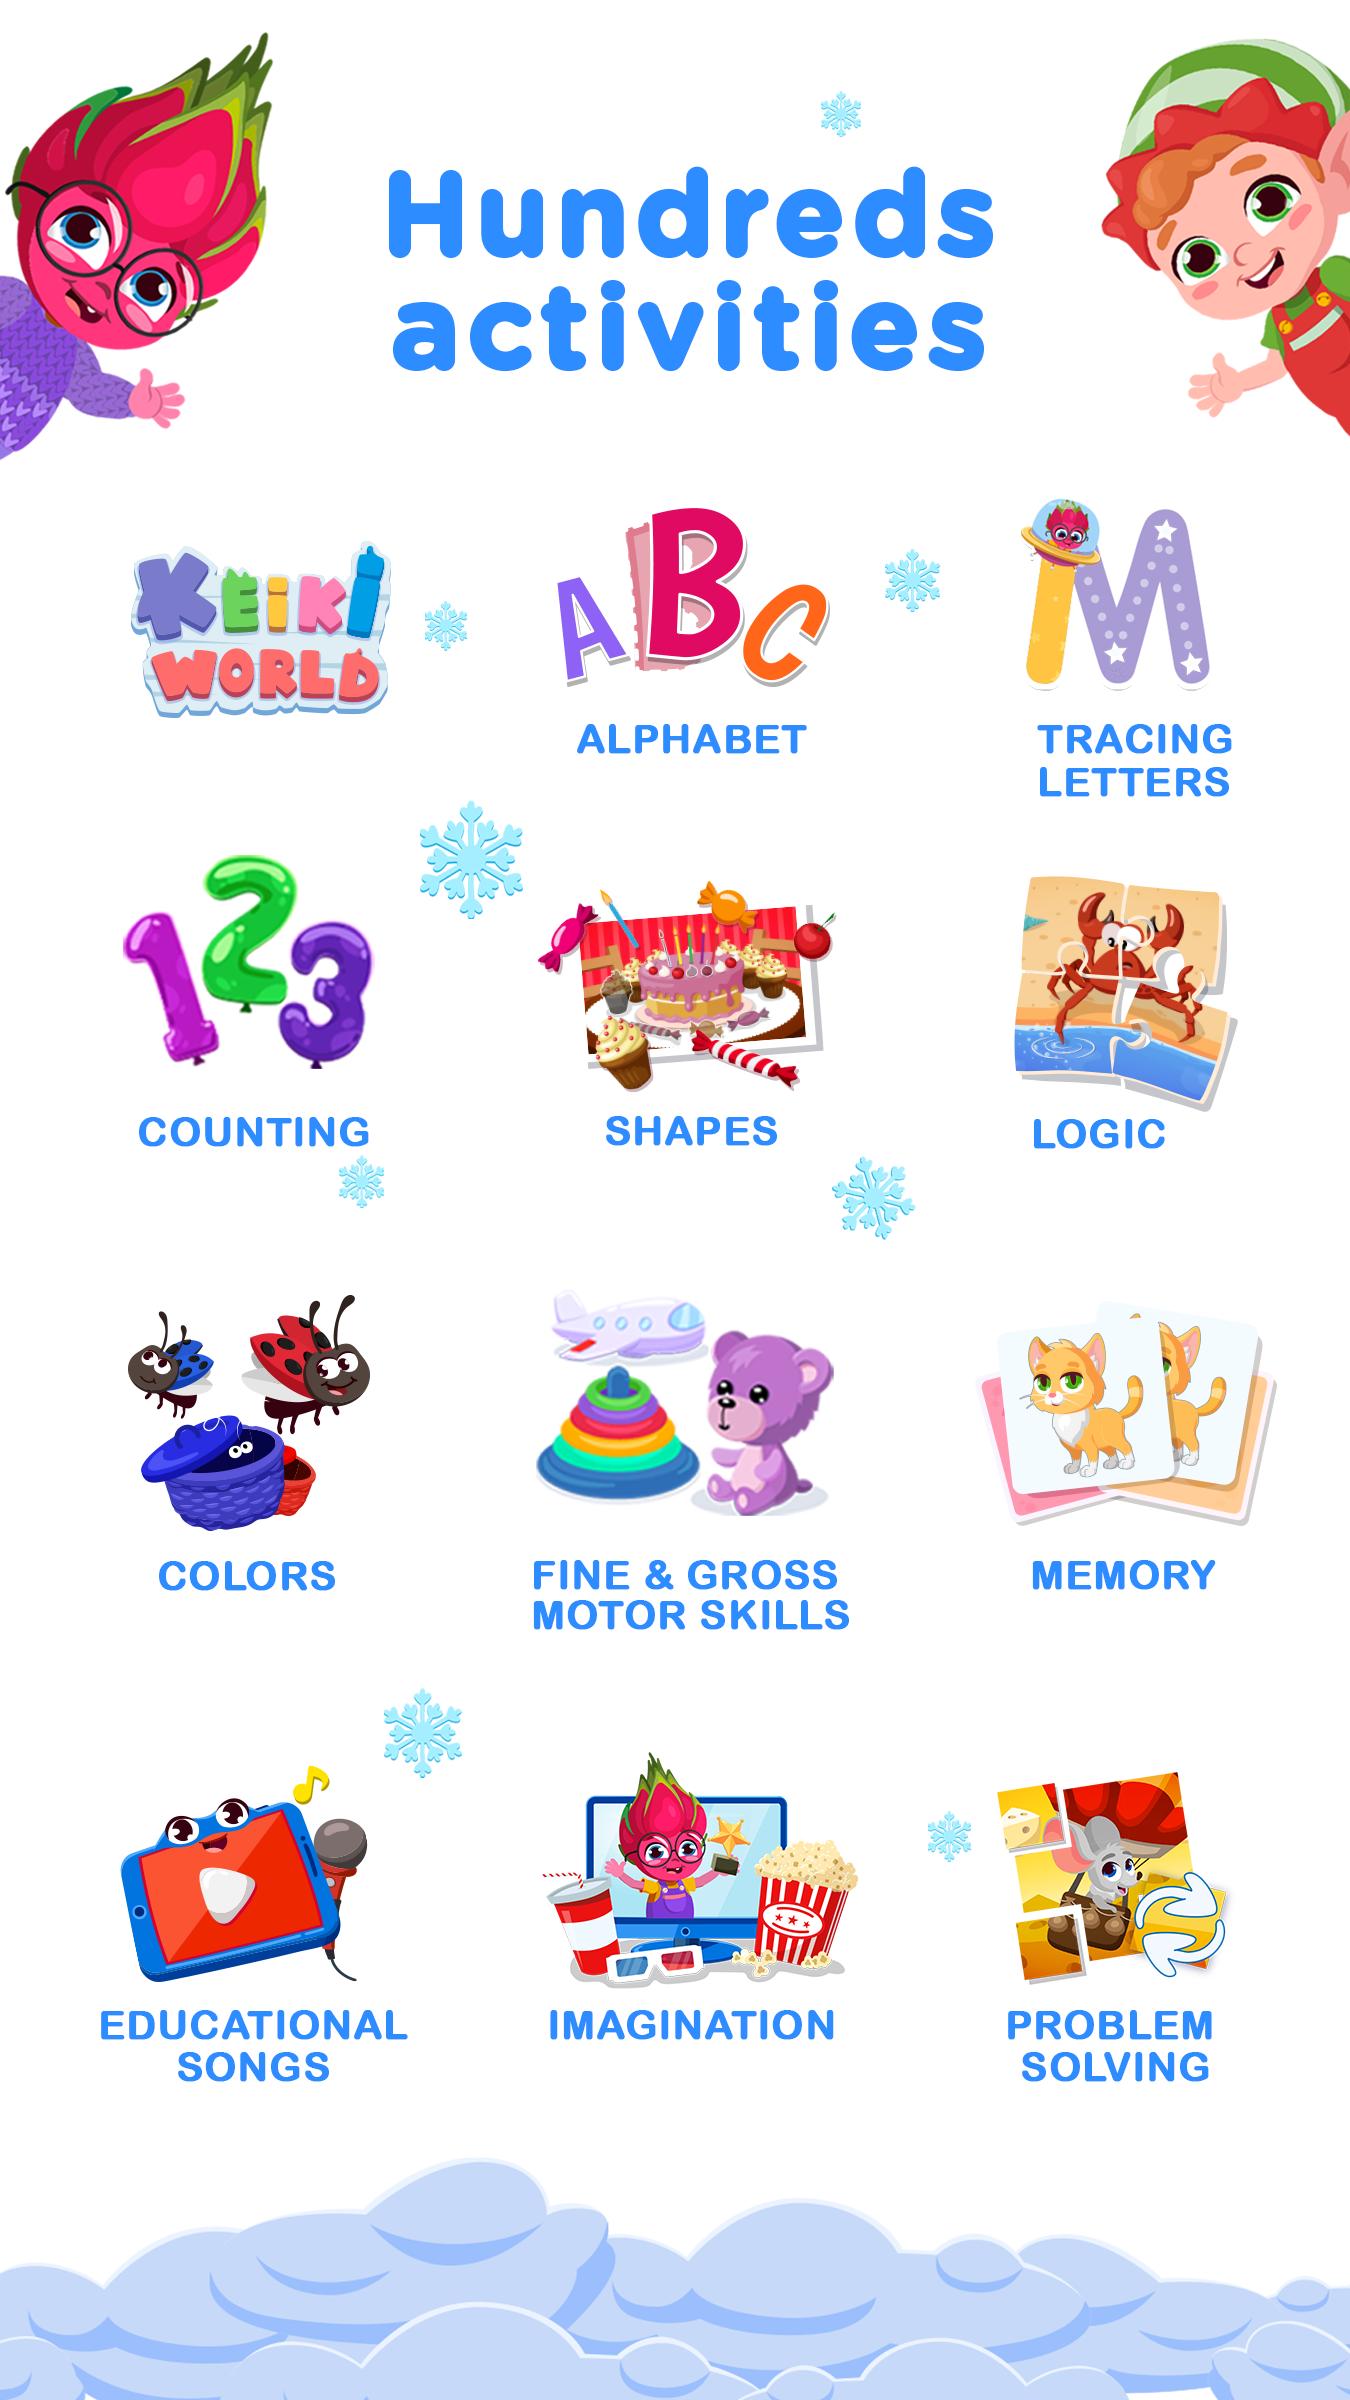 Keiki - ABC Letters Puzzle Games for Kids & Babies 1.9.1 Screenshot 1